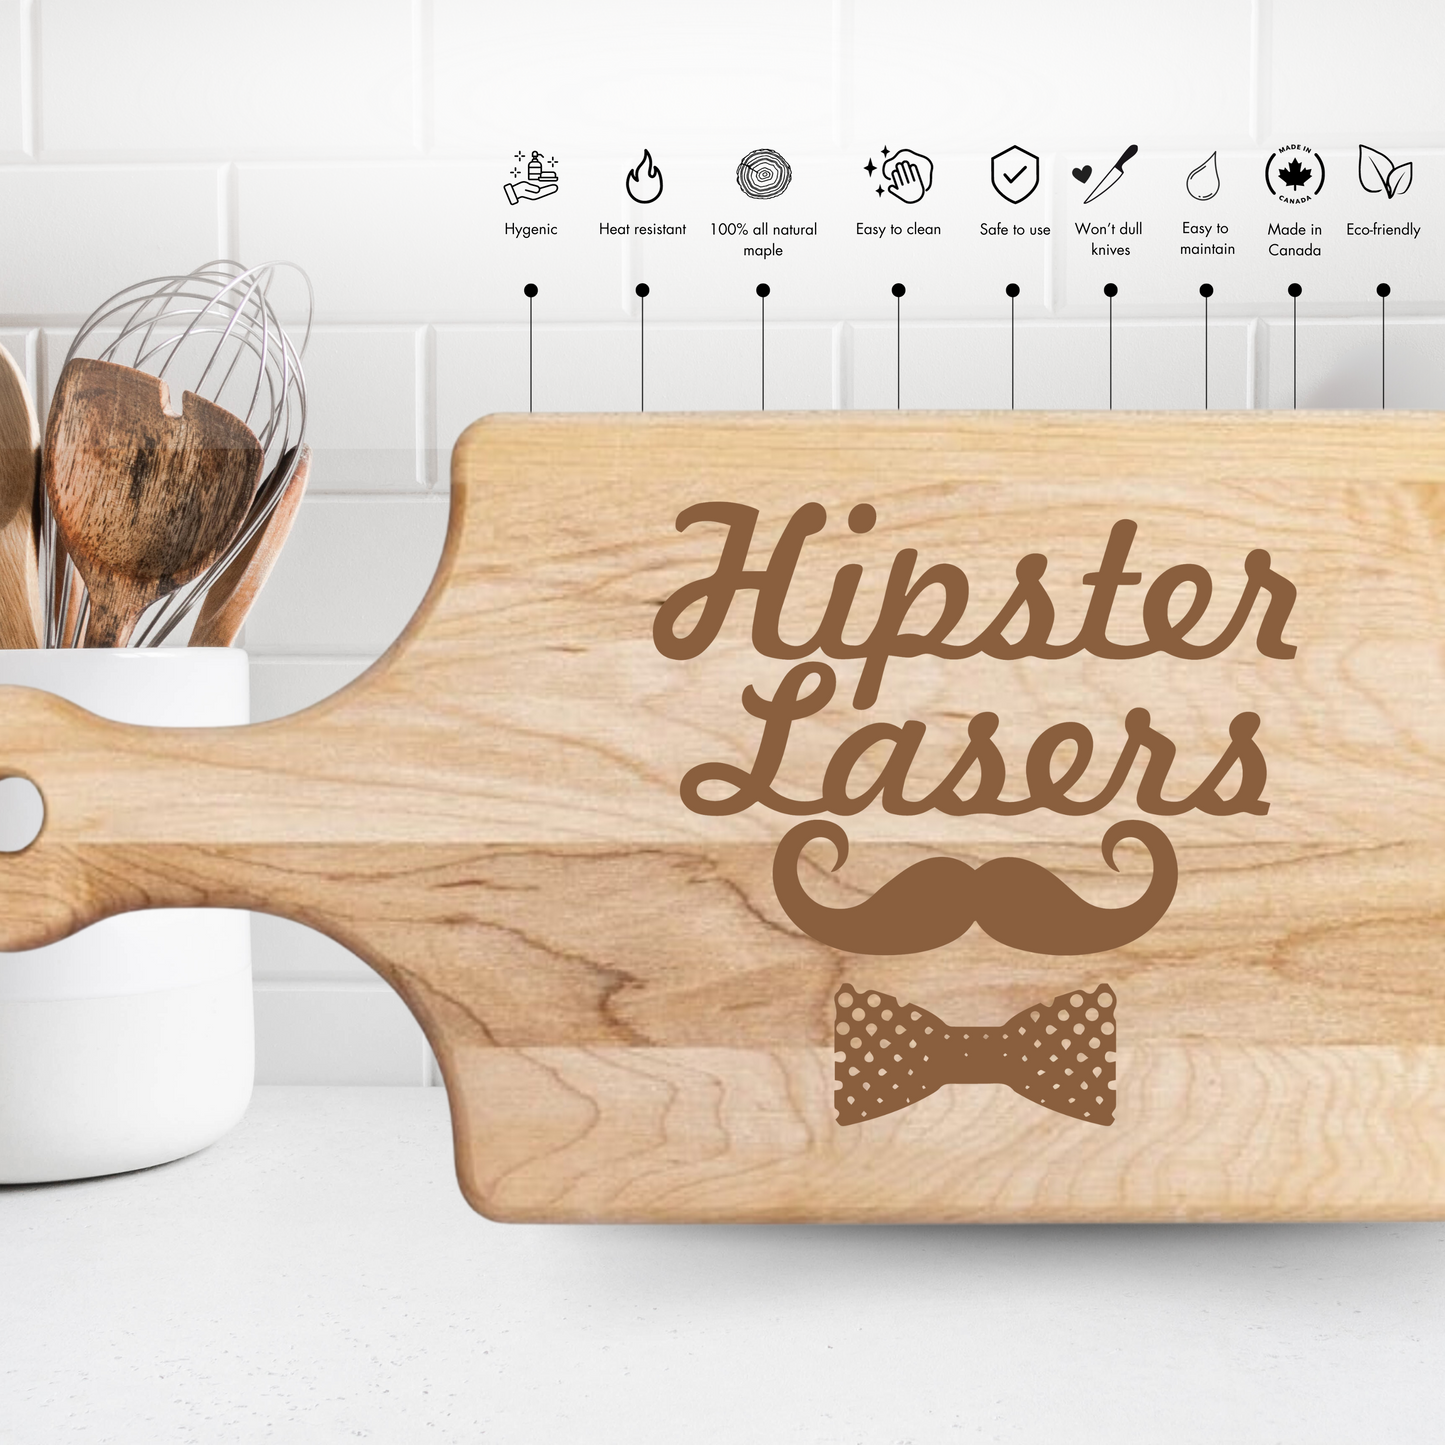 My Favorite People Have Paws Cutting Board - Premium Cutting Boards from Hipster Lasers - Just $40! Shop now at Hipster Lasers